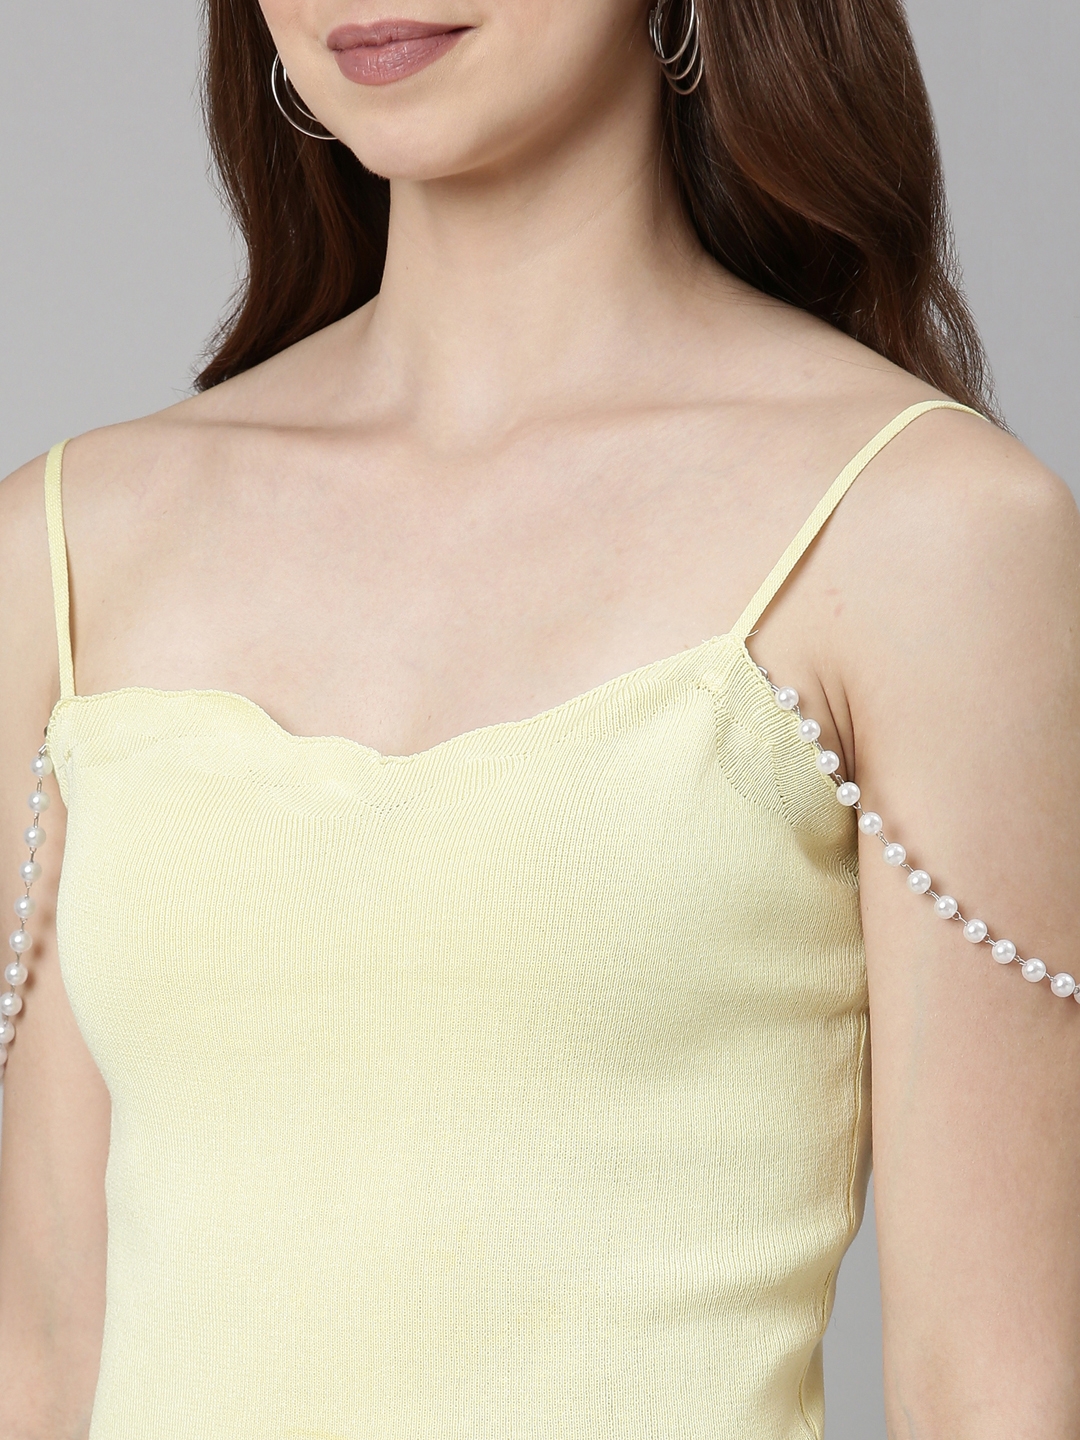 Showoff | SHOWOFF Women's Shoulder Straps Solid Sleeveless Yellow Crop Tank Top 7